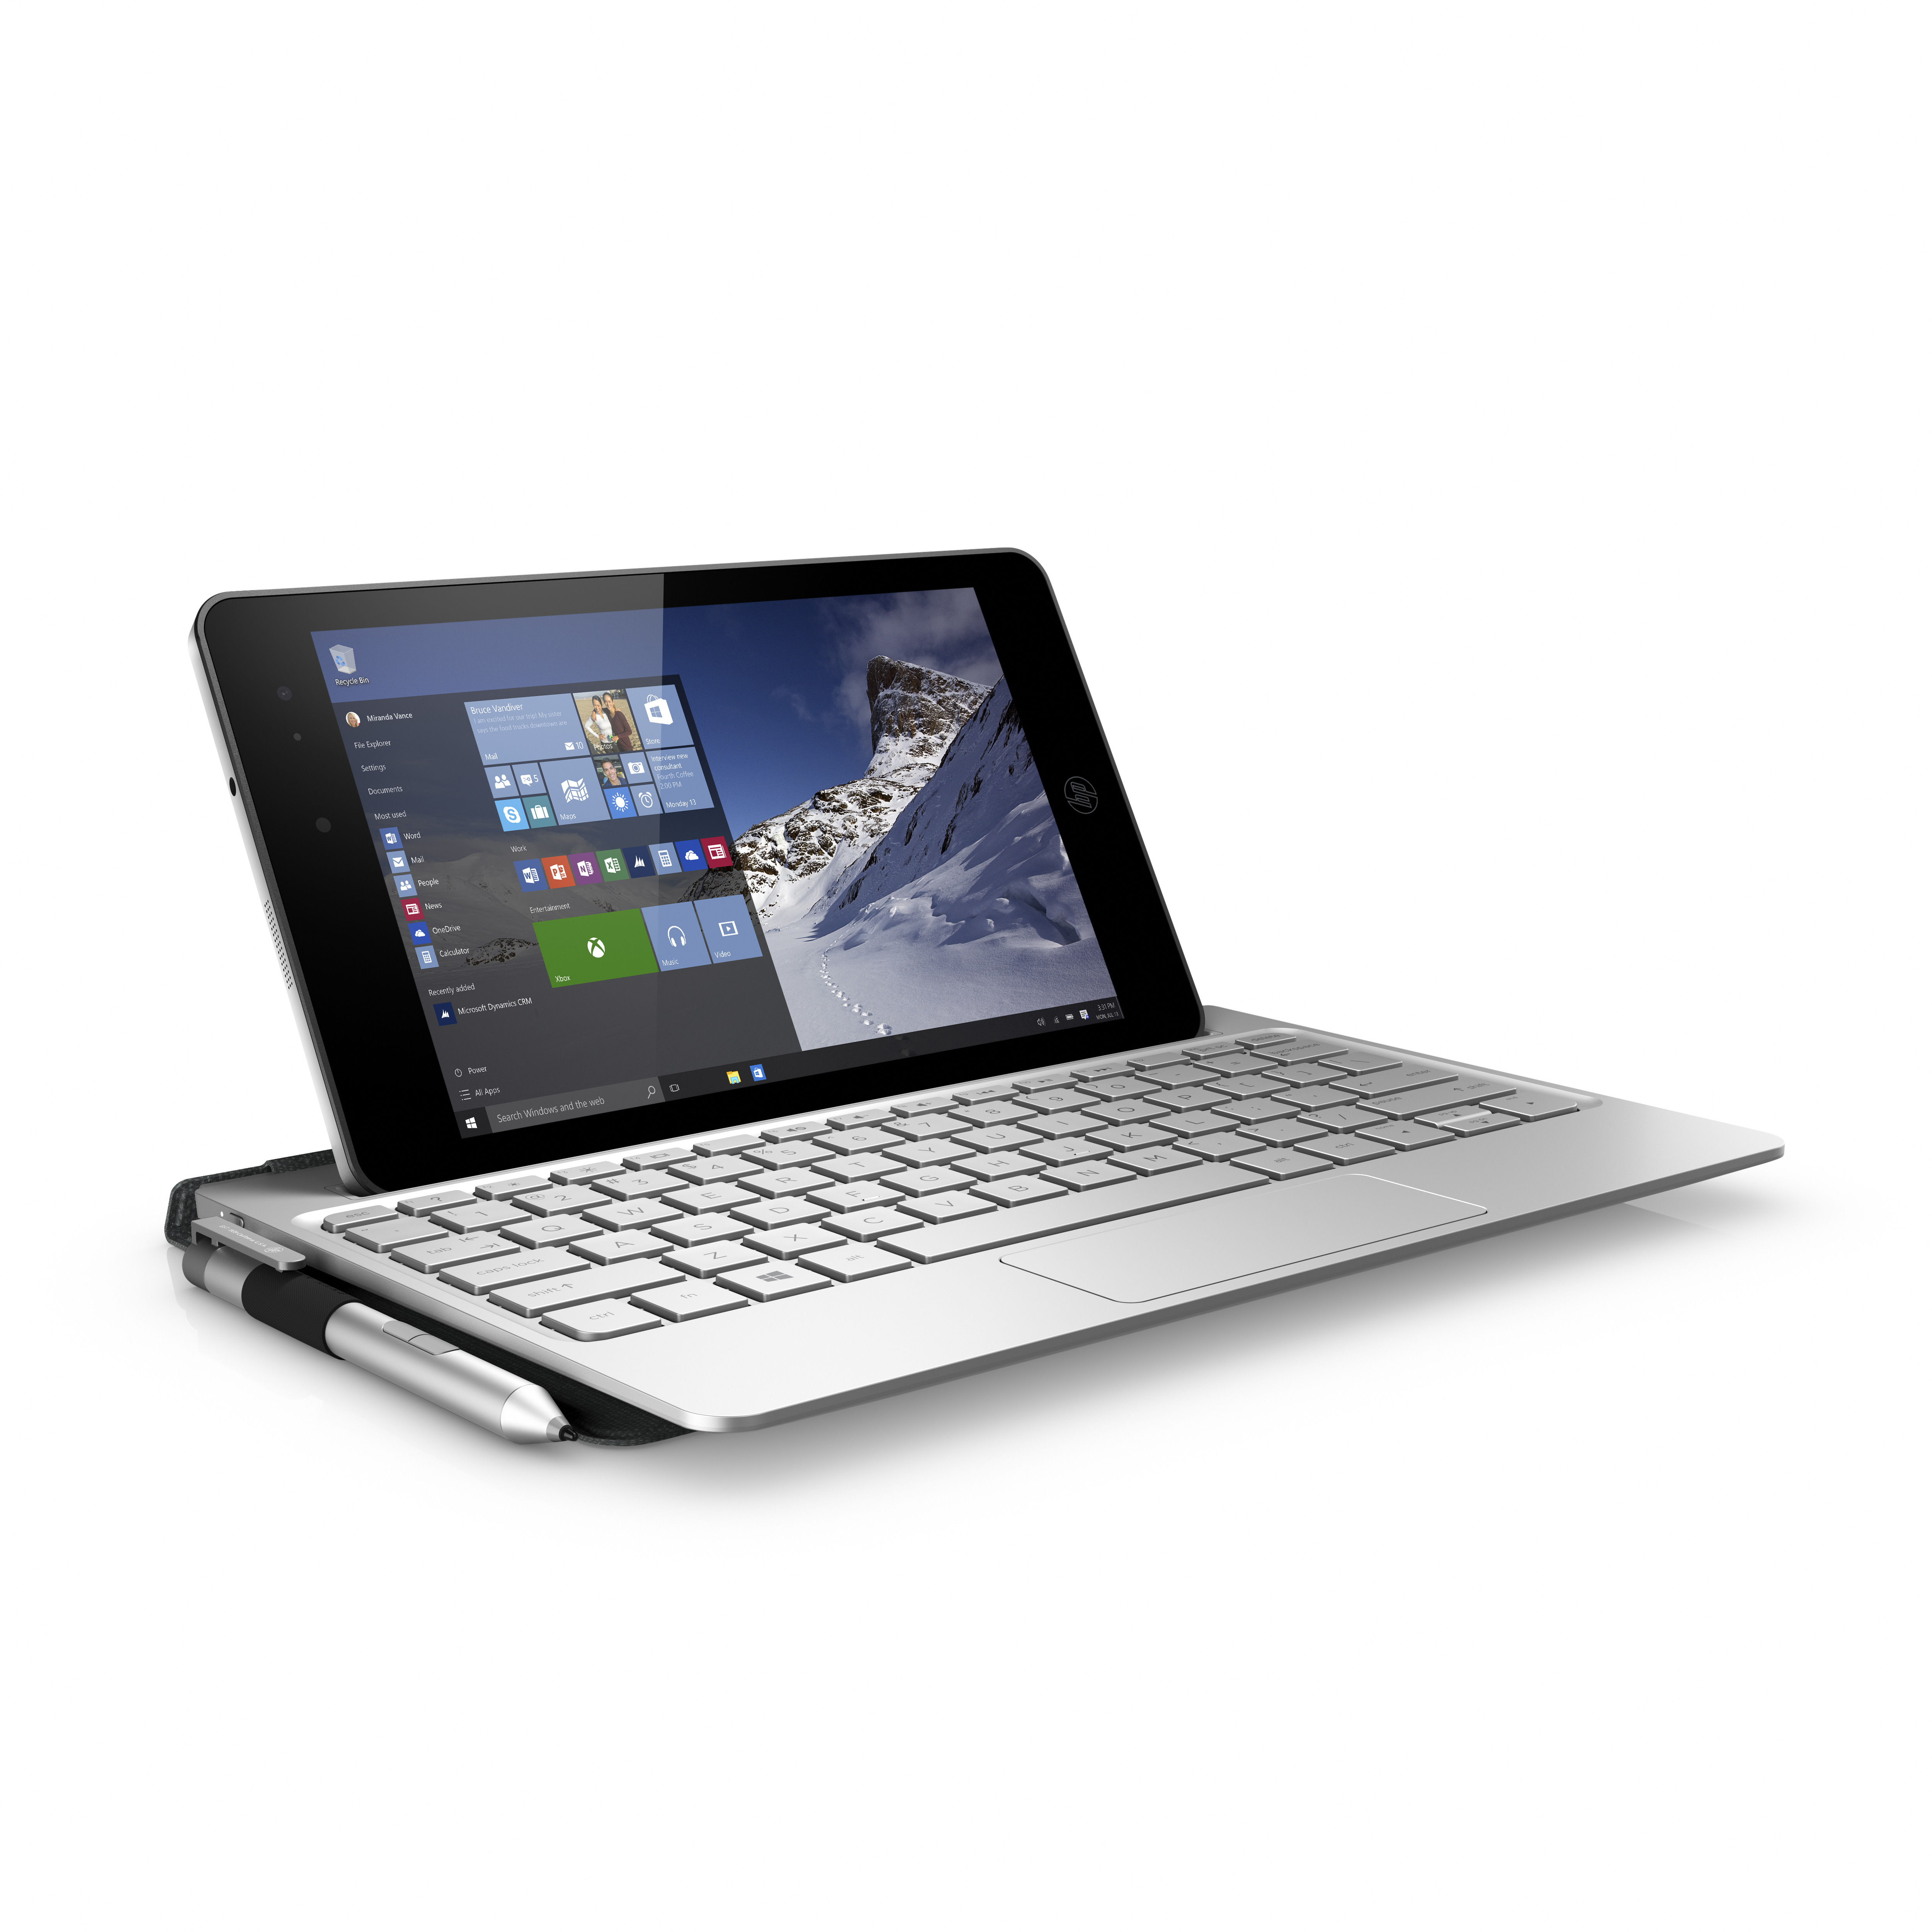 HP’s new 8-inch Windows tablet has a 10-inch keyboard dock - The Verge